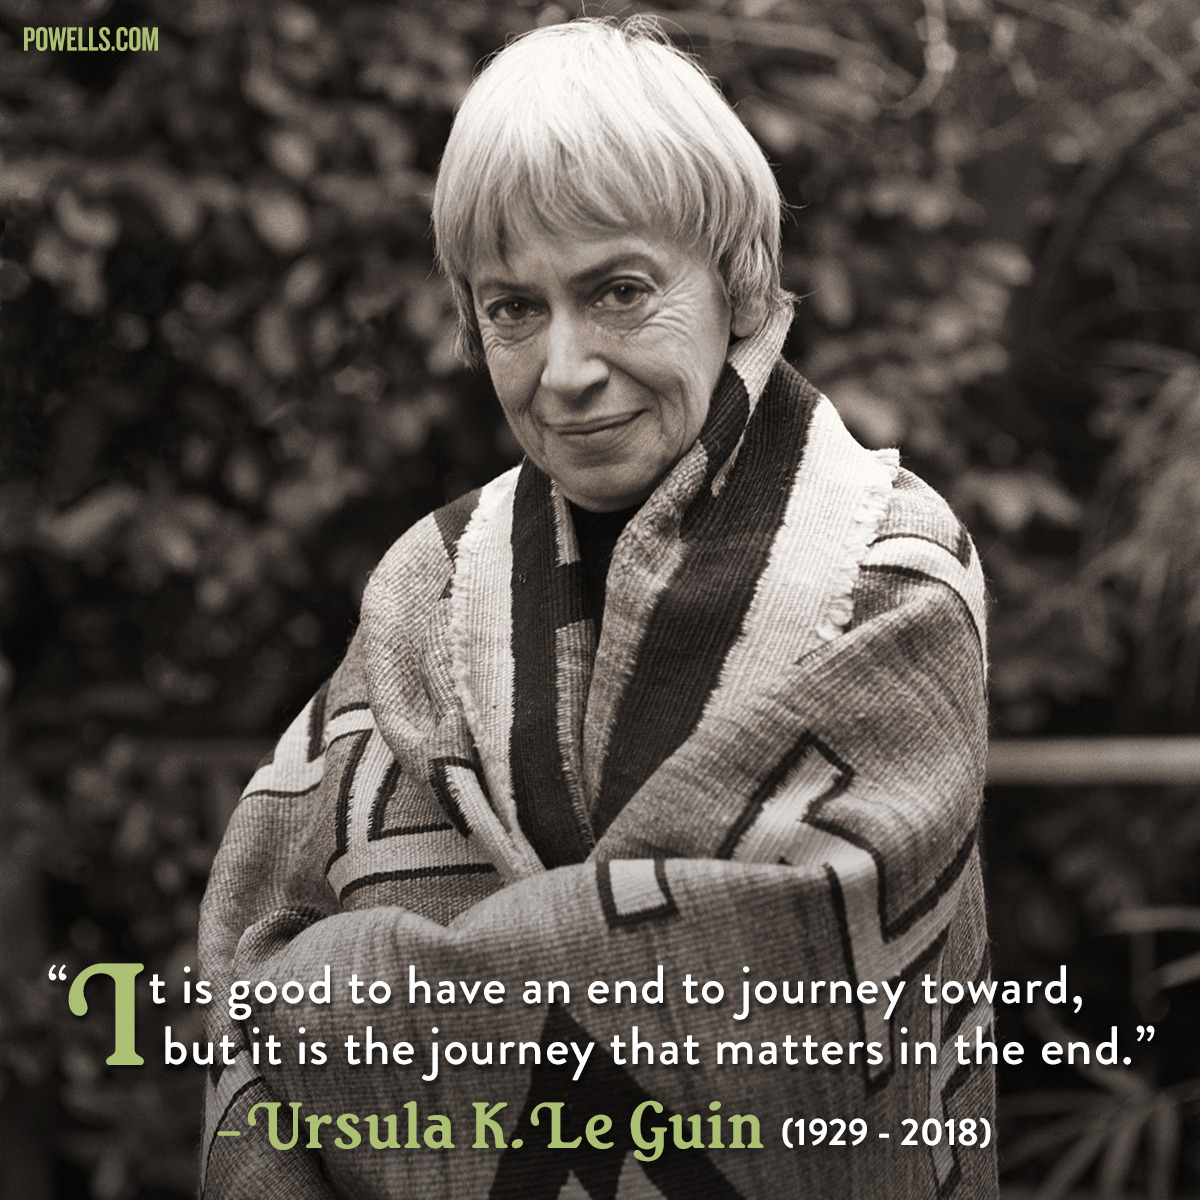 powells:
“ Portland author and perennial Powell’s staff favorite Ursula K. Le Guin passed away on Monday at the age of 88. Renowned for her gorgeous and deeply intelligent contributions to the science fiction and fantasy genres, Le Guin was also a...